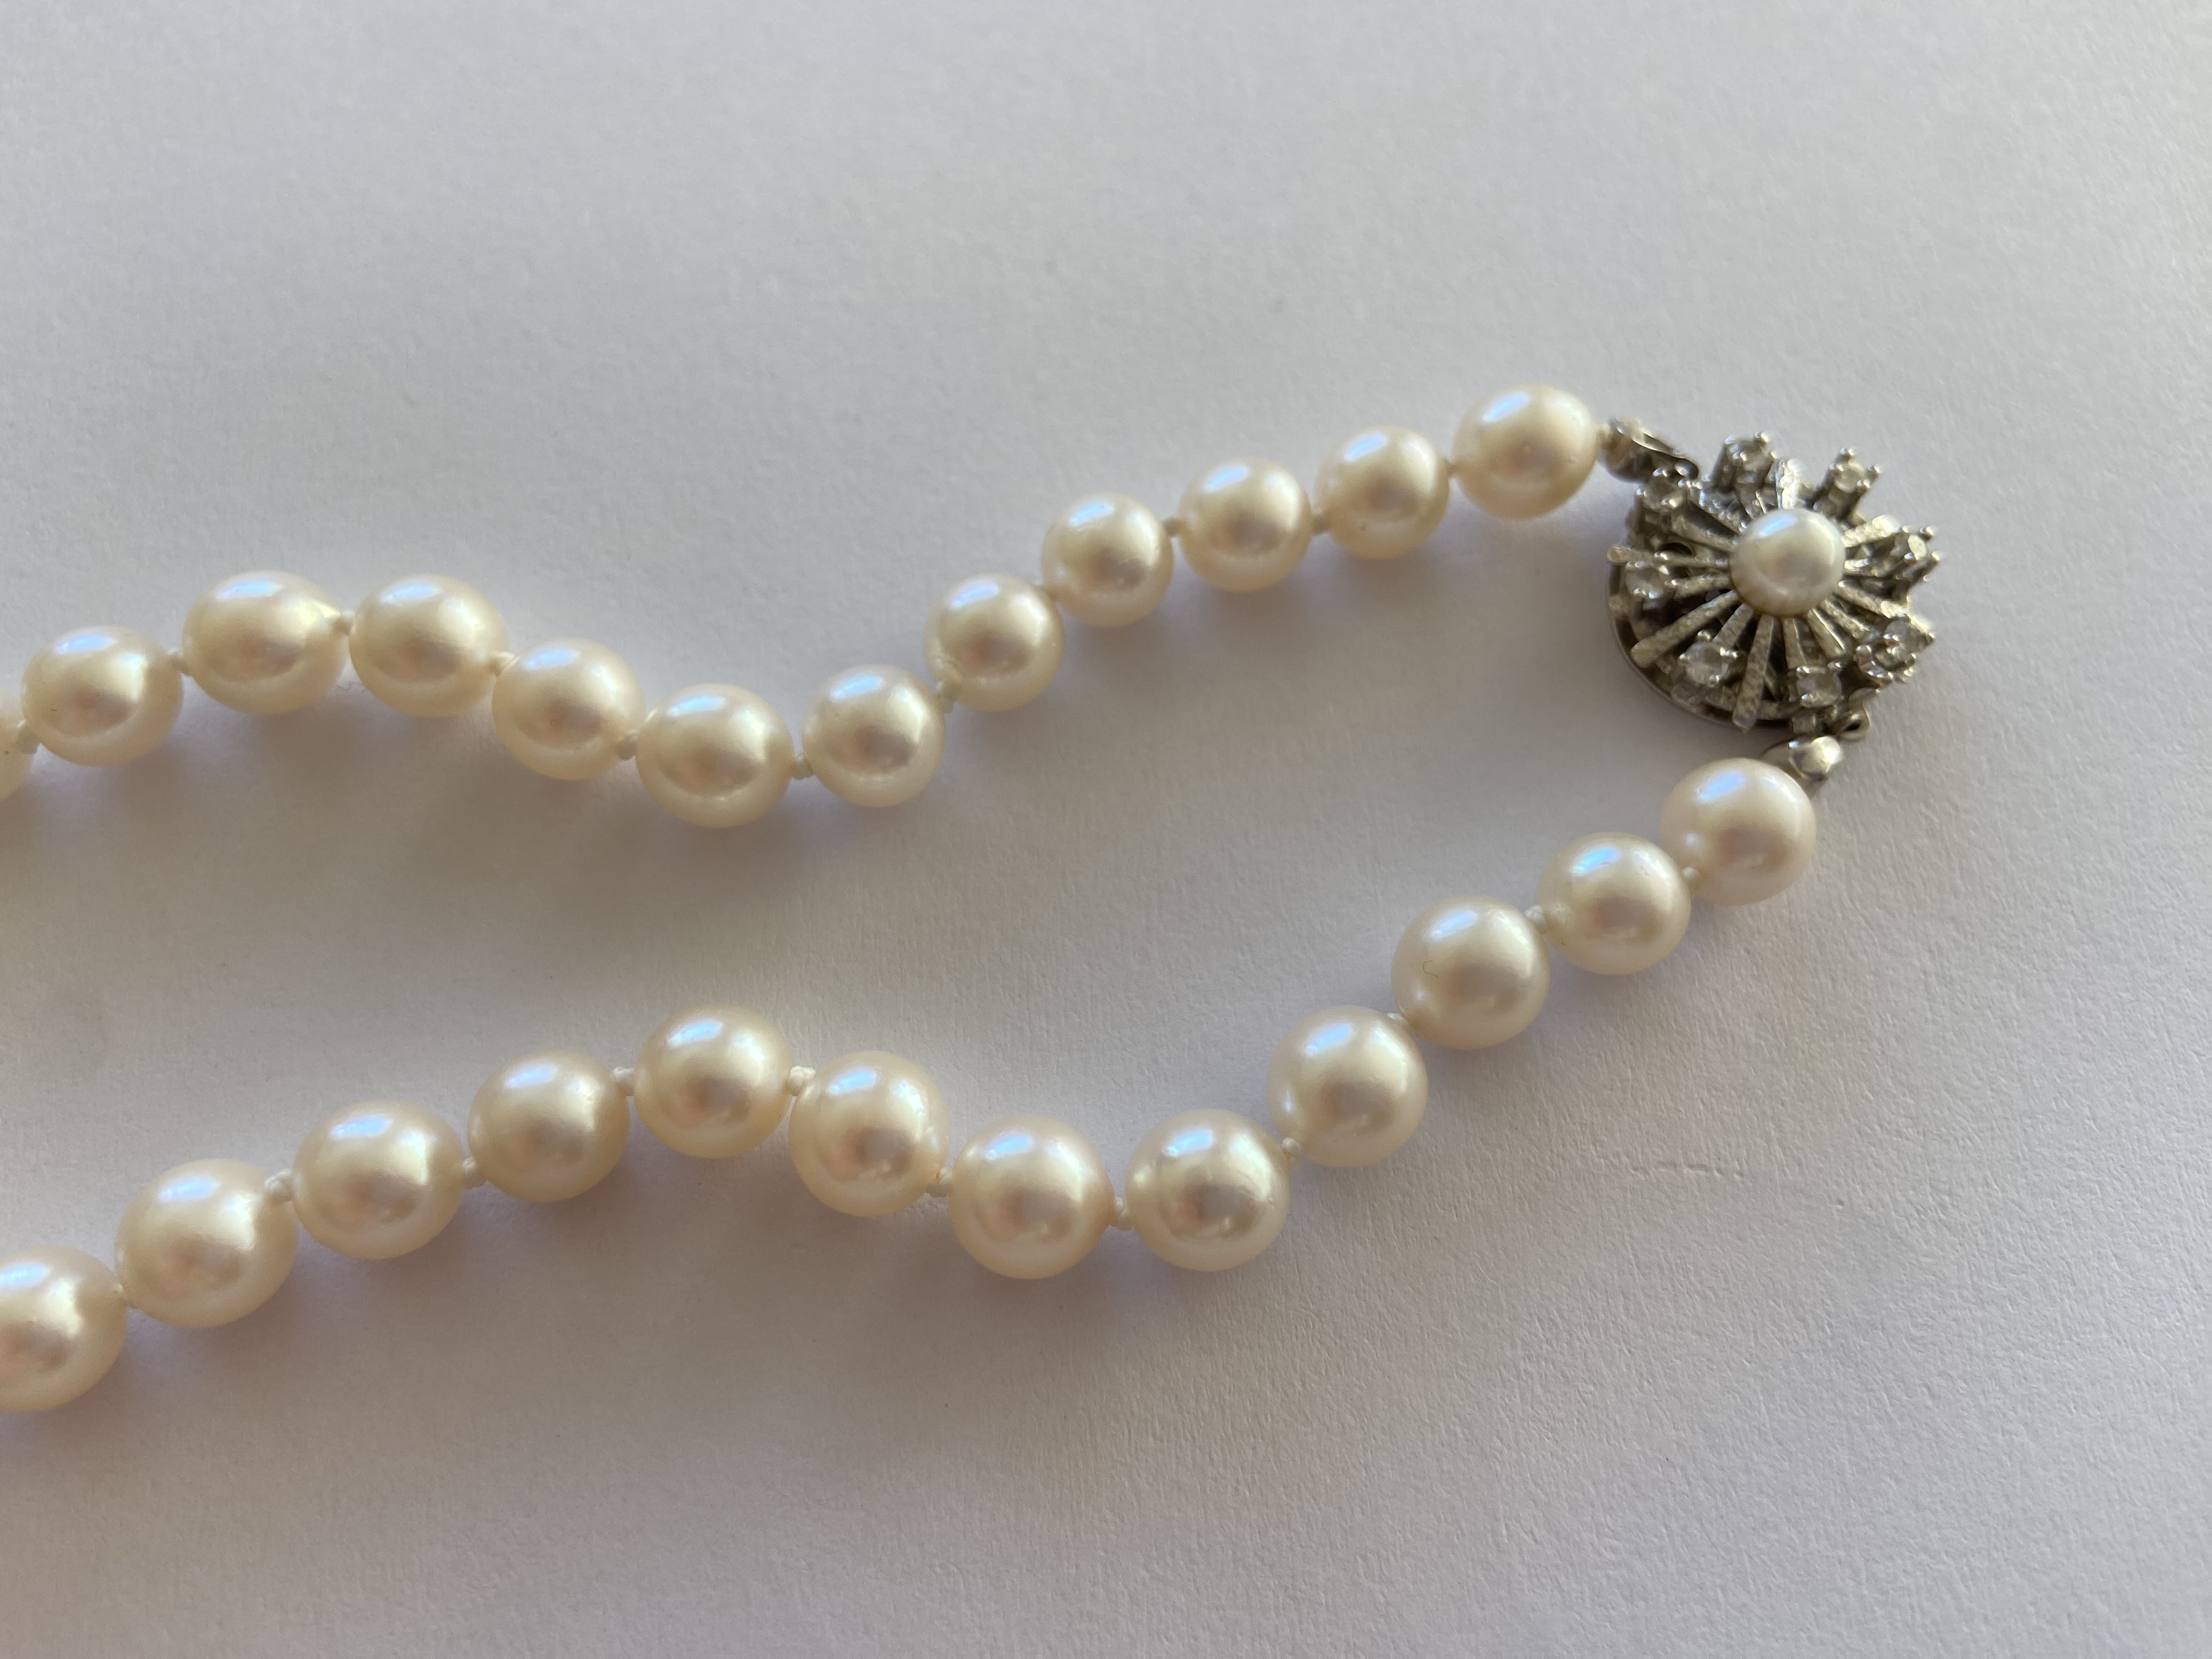 What kind of pearls are these? | Pearl Education - Pearl-Guide.com